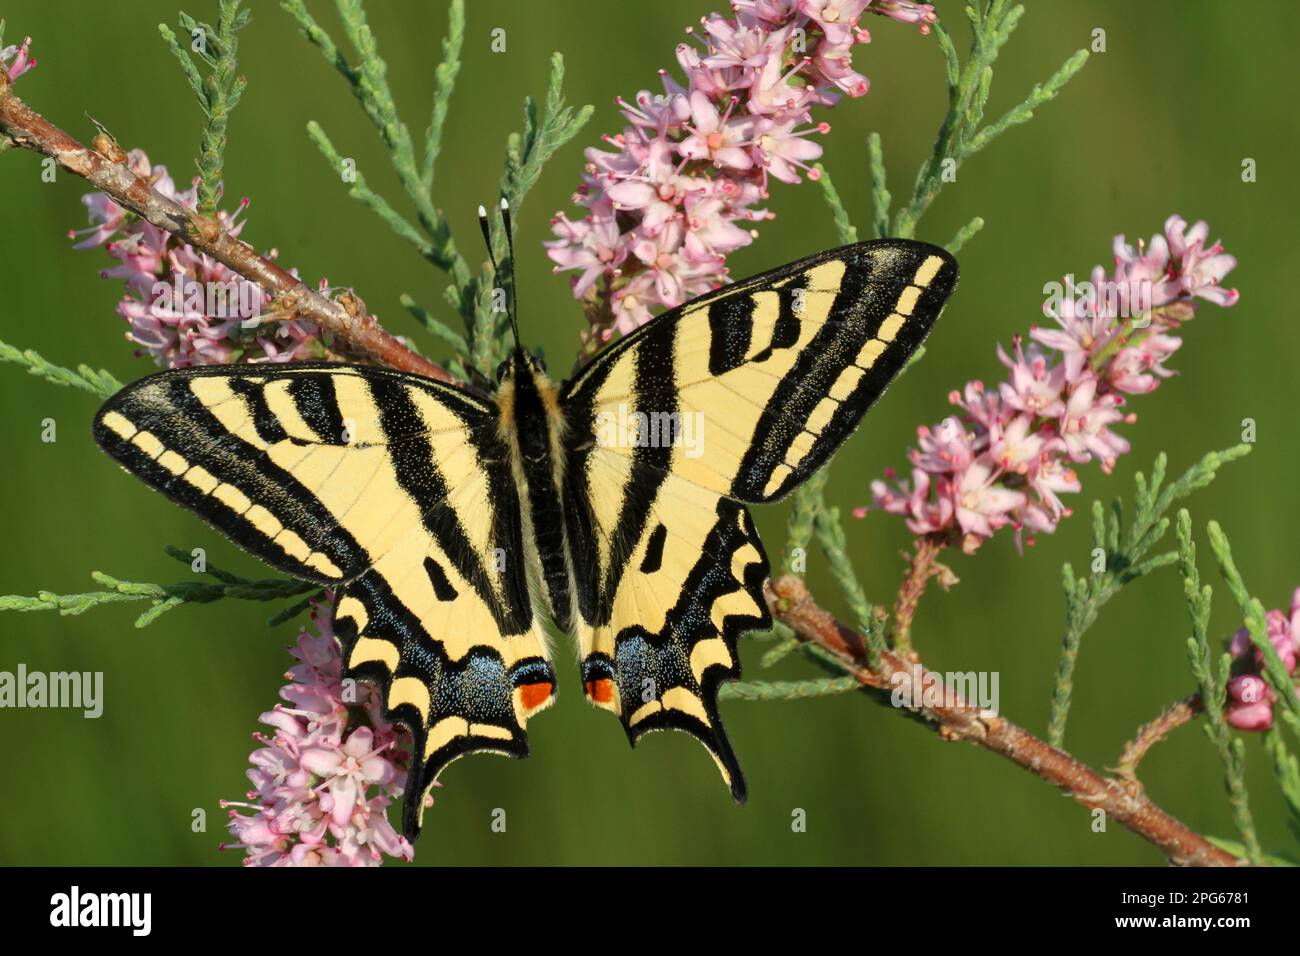 Southern alexanor (Papilio alexanor), adult male, feeding on flowers of French french tamarisk (Tamarix gallica), Peloponesos, Greece Stock Photo